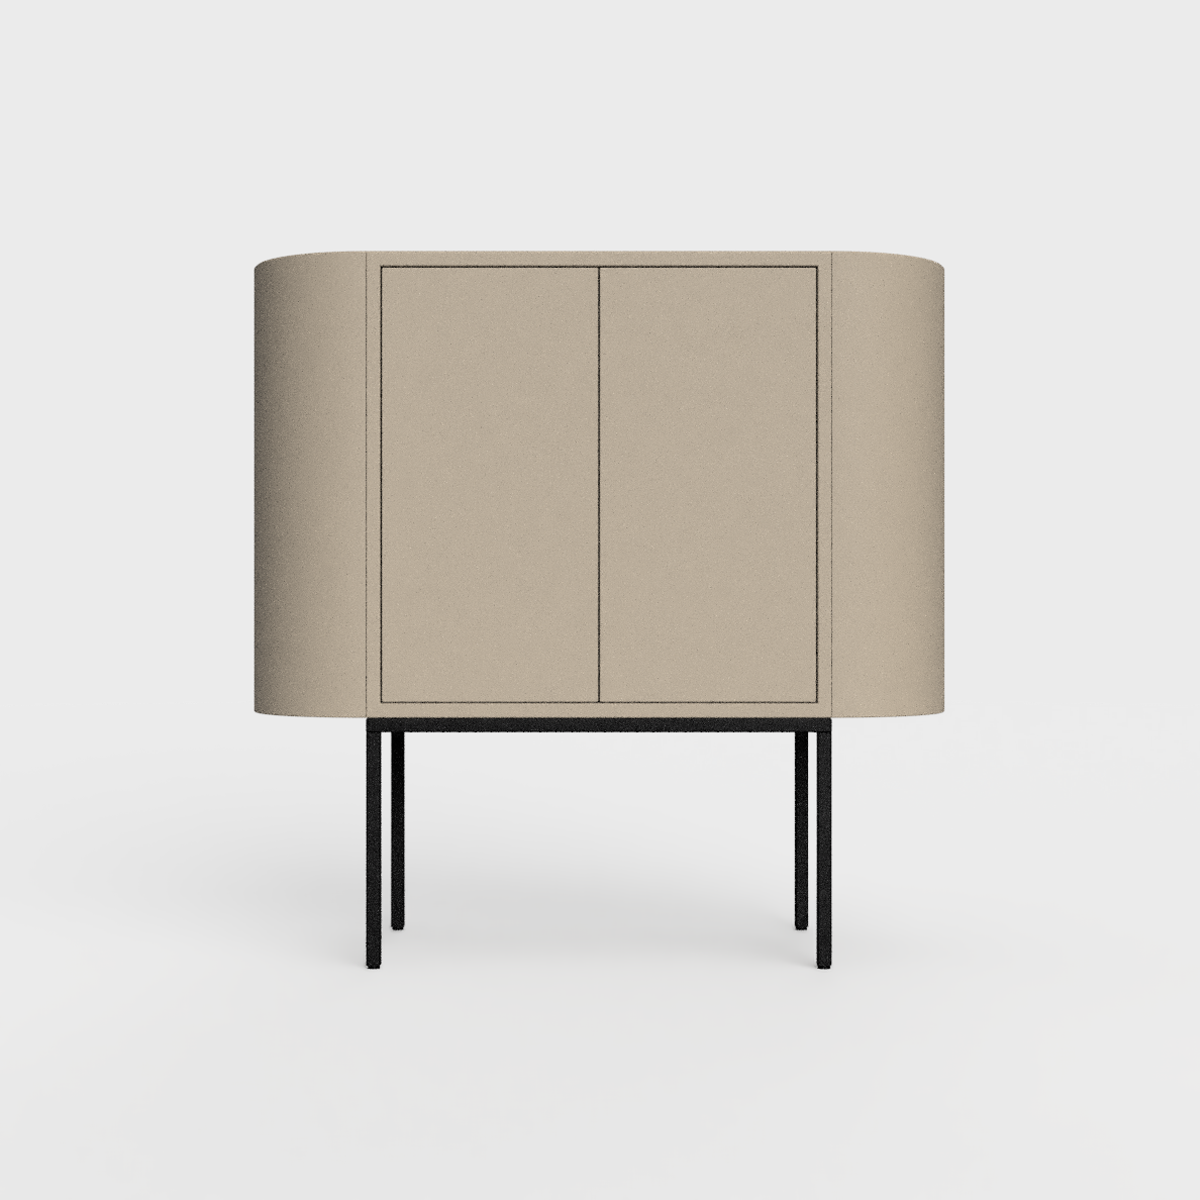 Siena 01 Sideboard in khaki color, powder-coated steel, elegant and modern piece of furniture for your living room